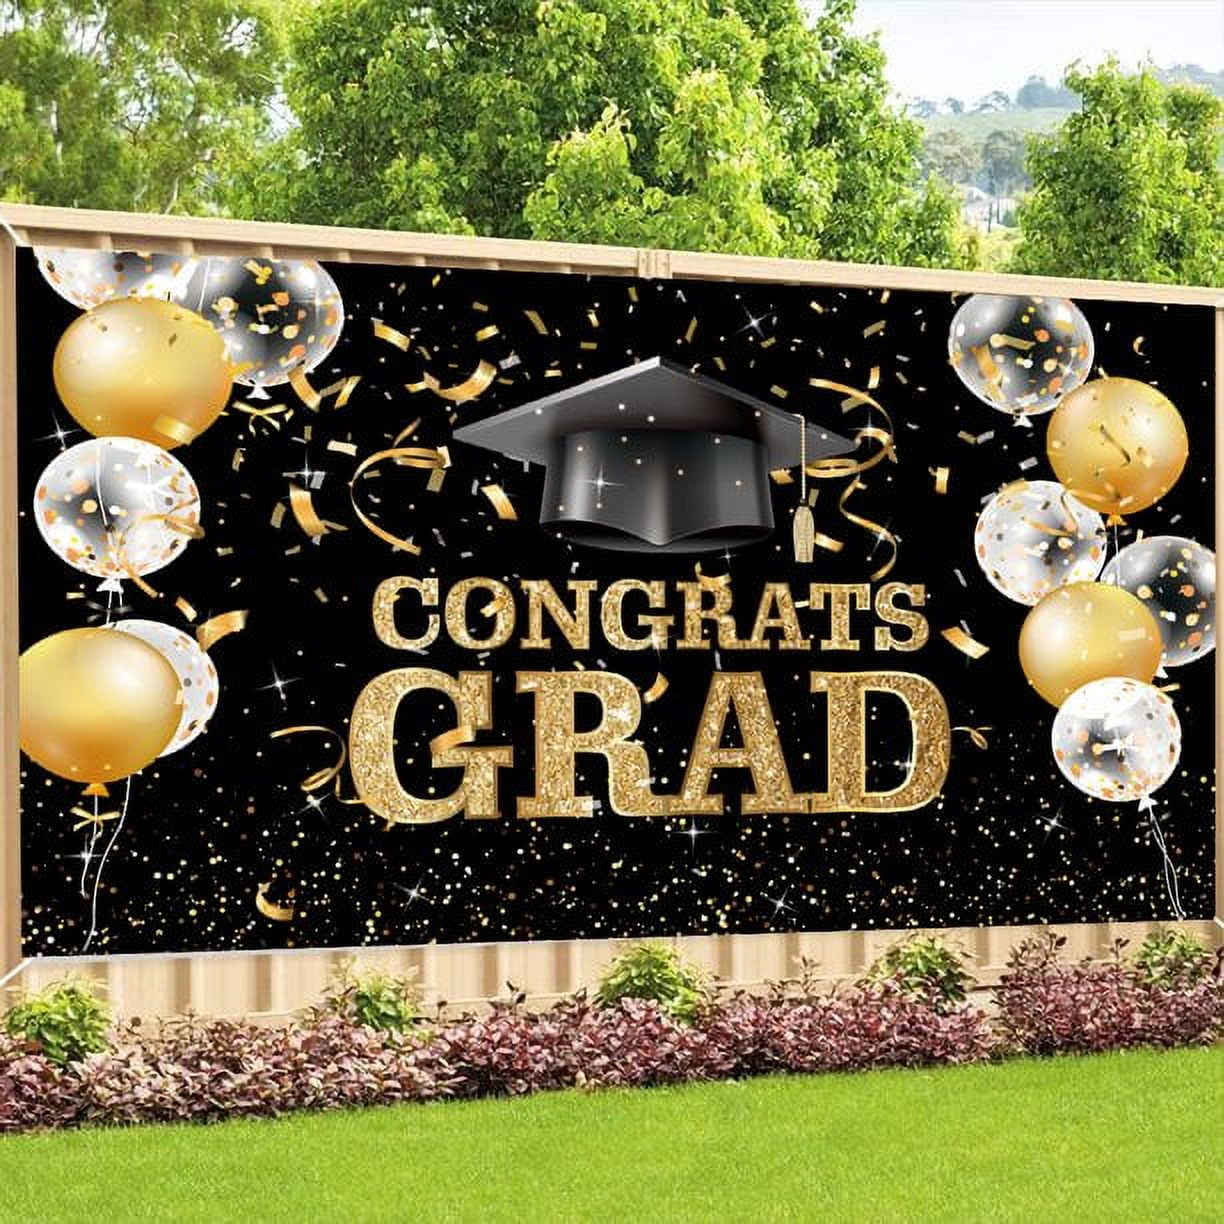 Graduation Decorations Class of 2024 Orange and Black Graduation Decorations Congrats Grad Banner Backdrop Graduation Photo Booth Props College